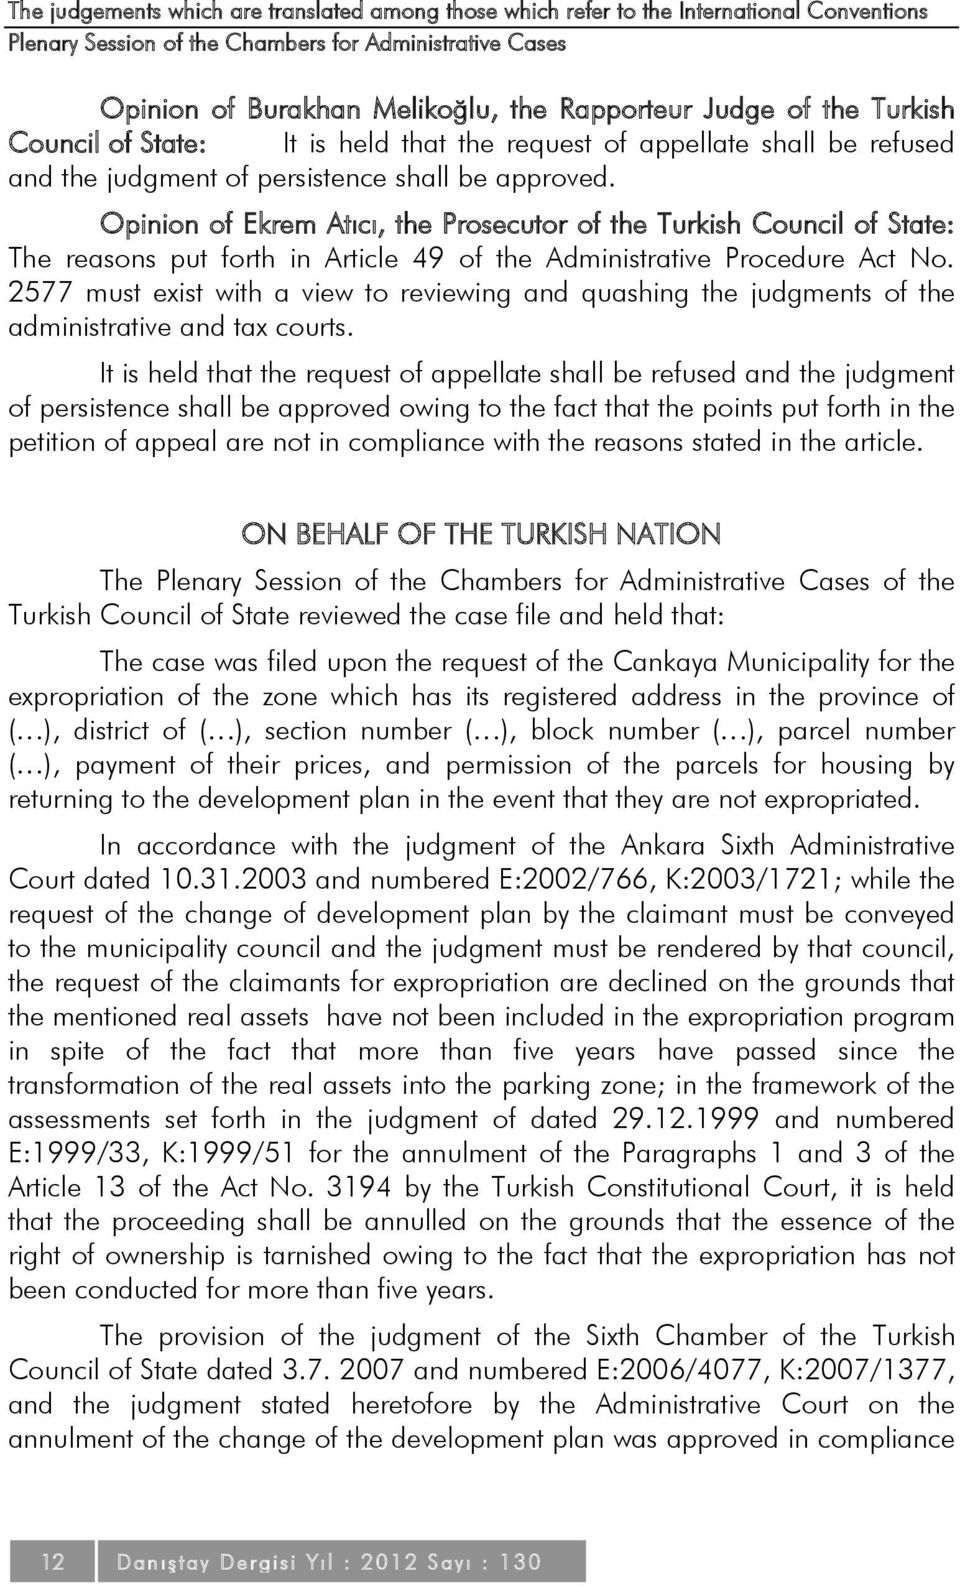 Opinion of Ekrem Atıcı, the Prosecutor of the Turkish Council of State: The reasons put forth in Article 49 of the Administrative Procedure Act No.